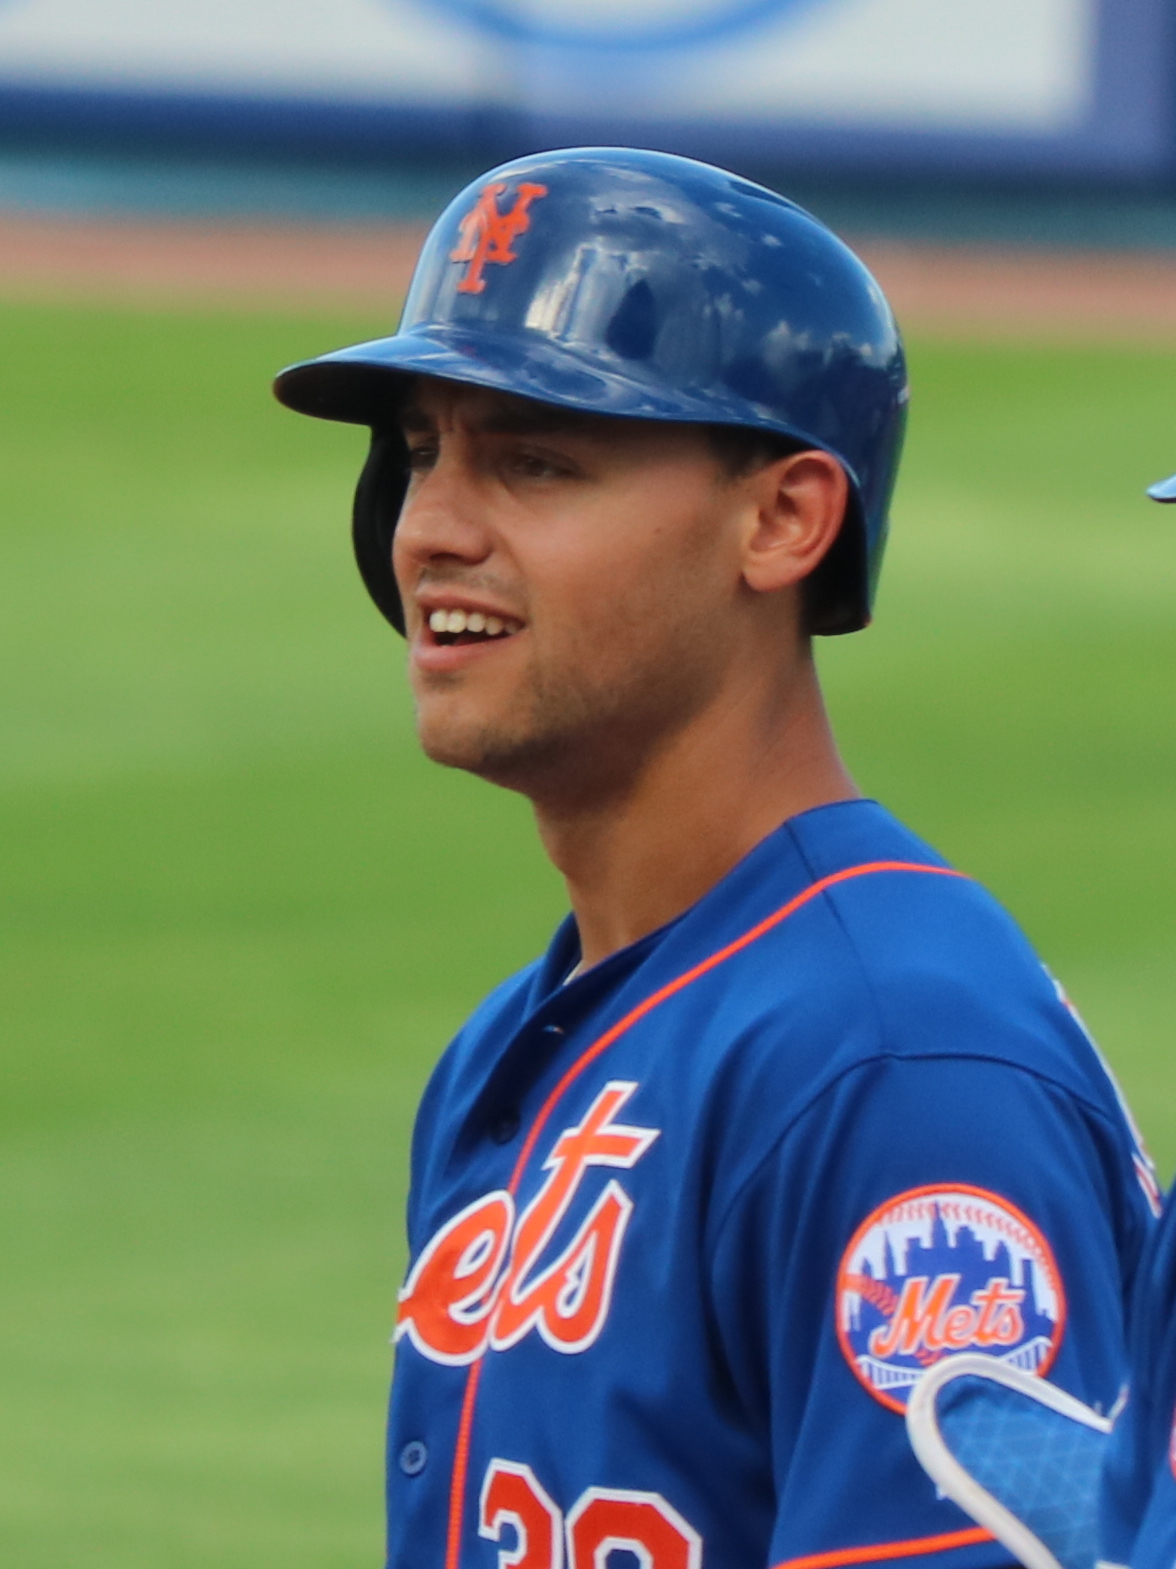 Michael Conforto Trading Cards: Values, Tracking & Hot Deals